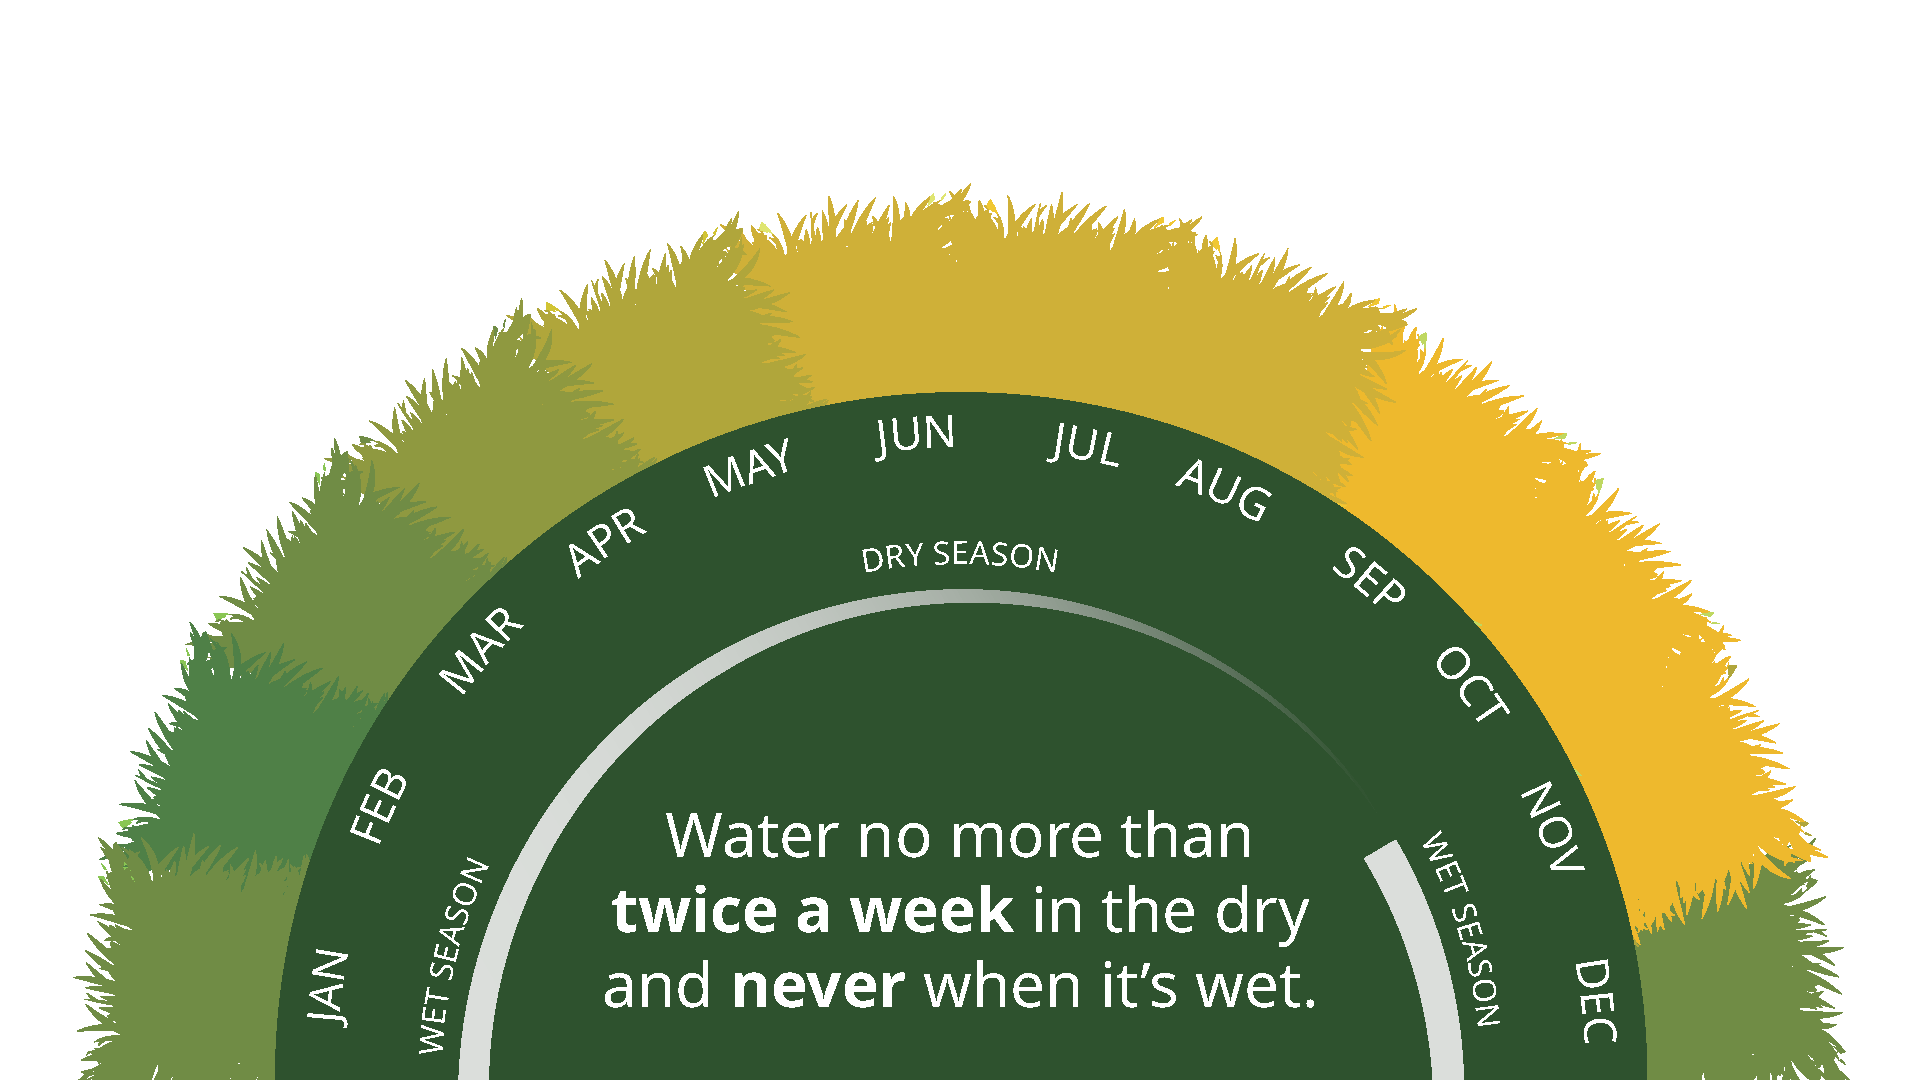 Calendar showing water no more than twice in the dry and never when it's wet